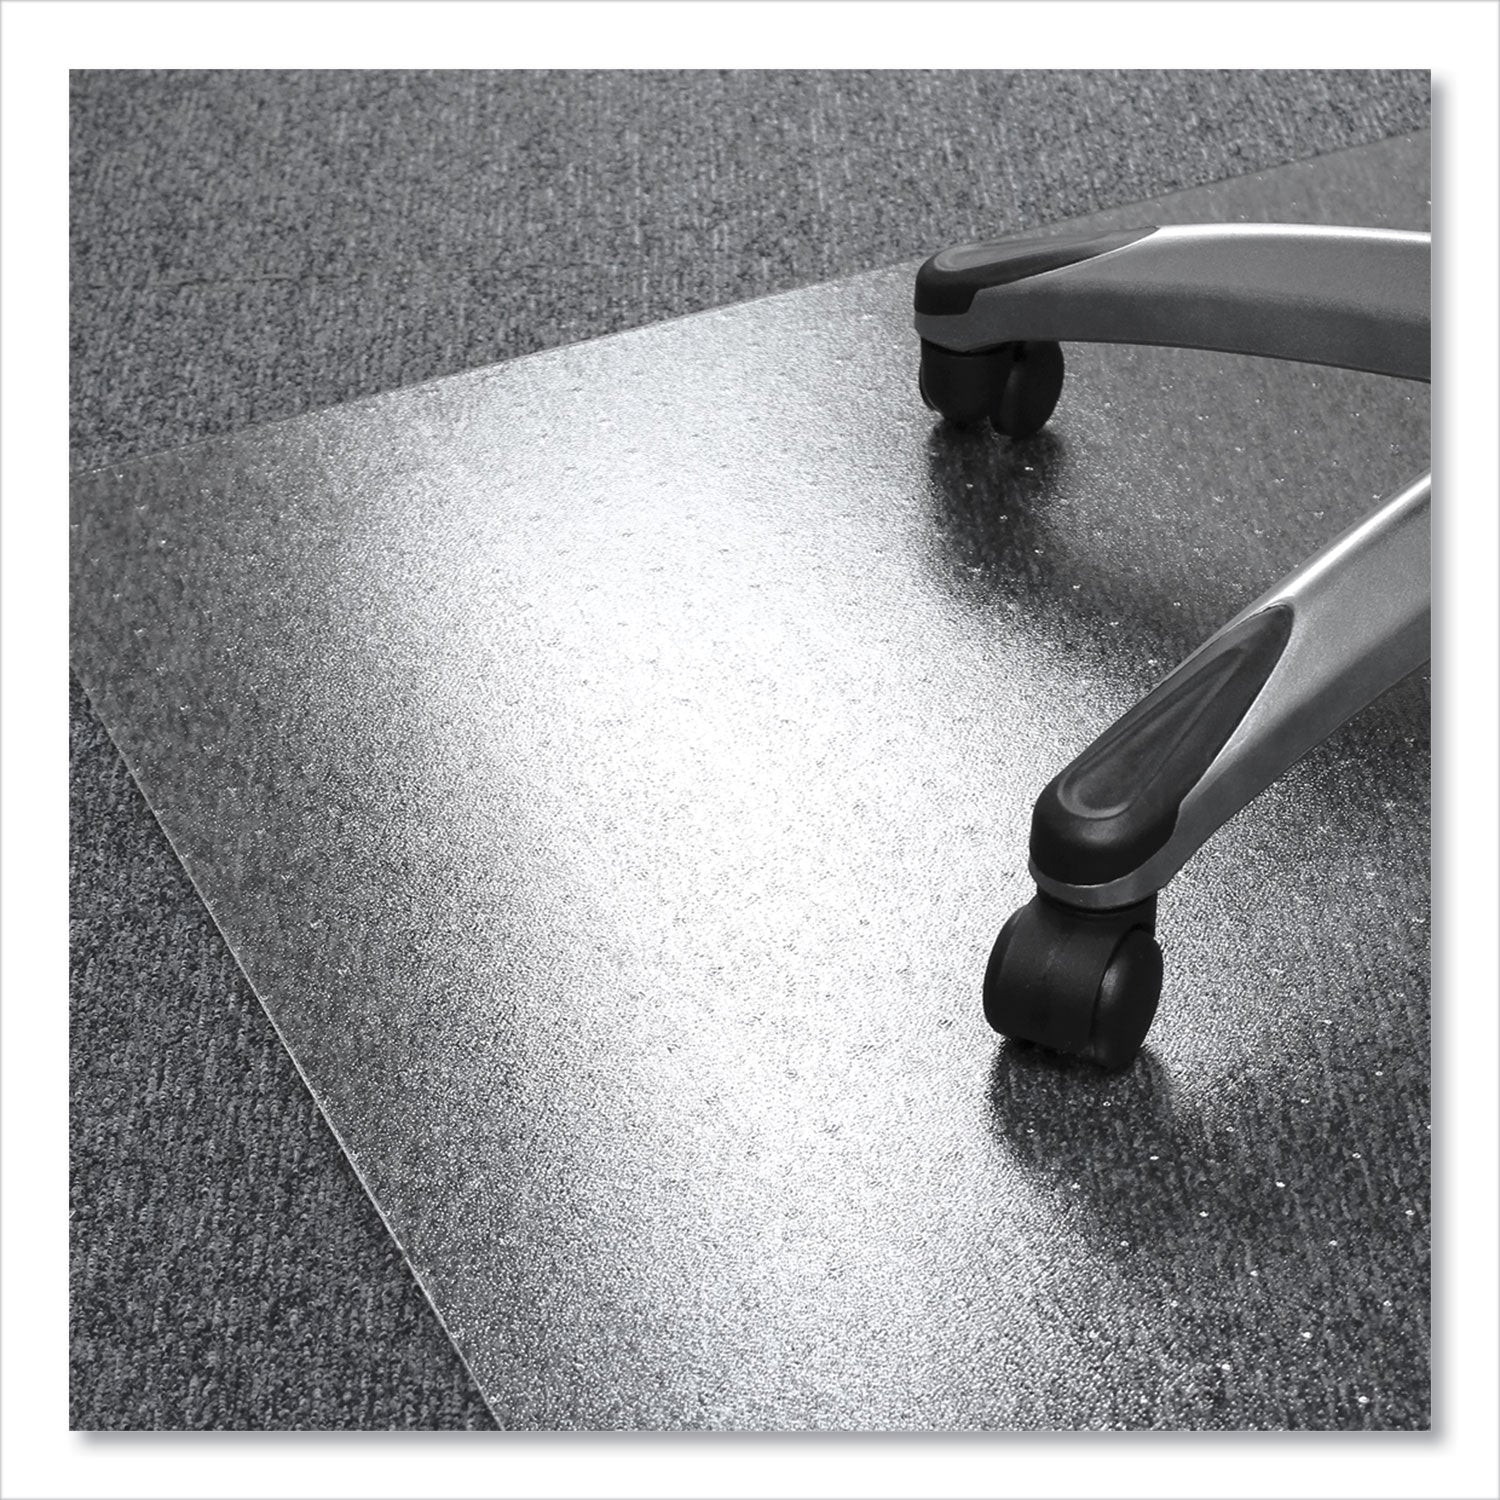 cleartex-ultimat-xxl-polycarb-square-general-office-mat-for-carpets-60-x-60-clear_flr1115015023er - 4